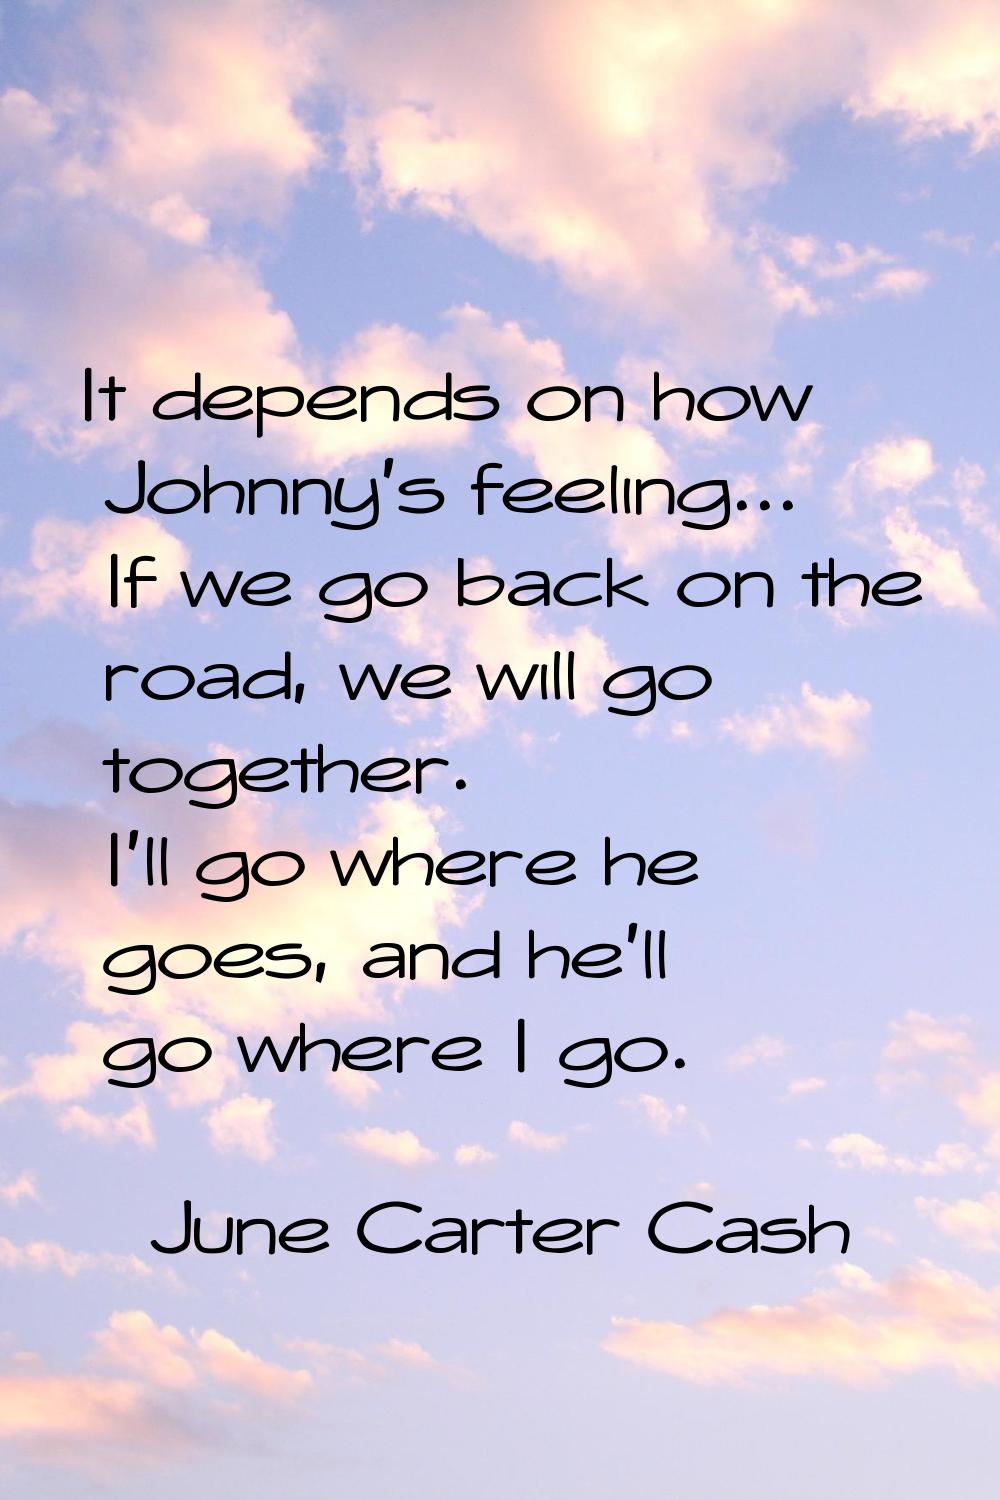 It depends on how Johnny's feeling... If we go back on the road, we will go together. I'll go where